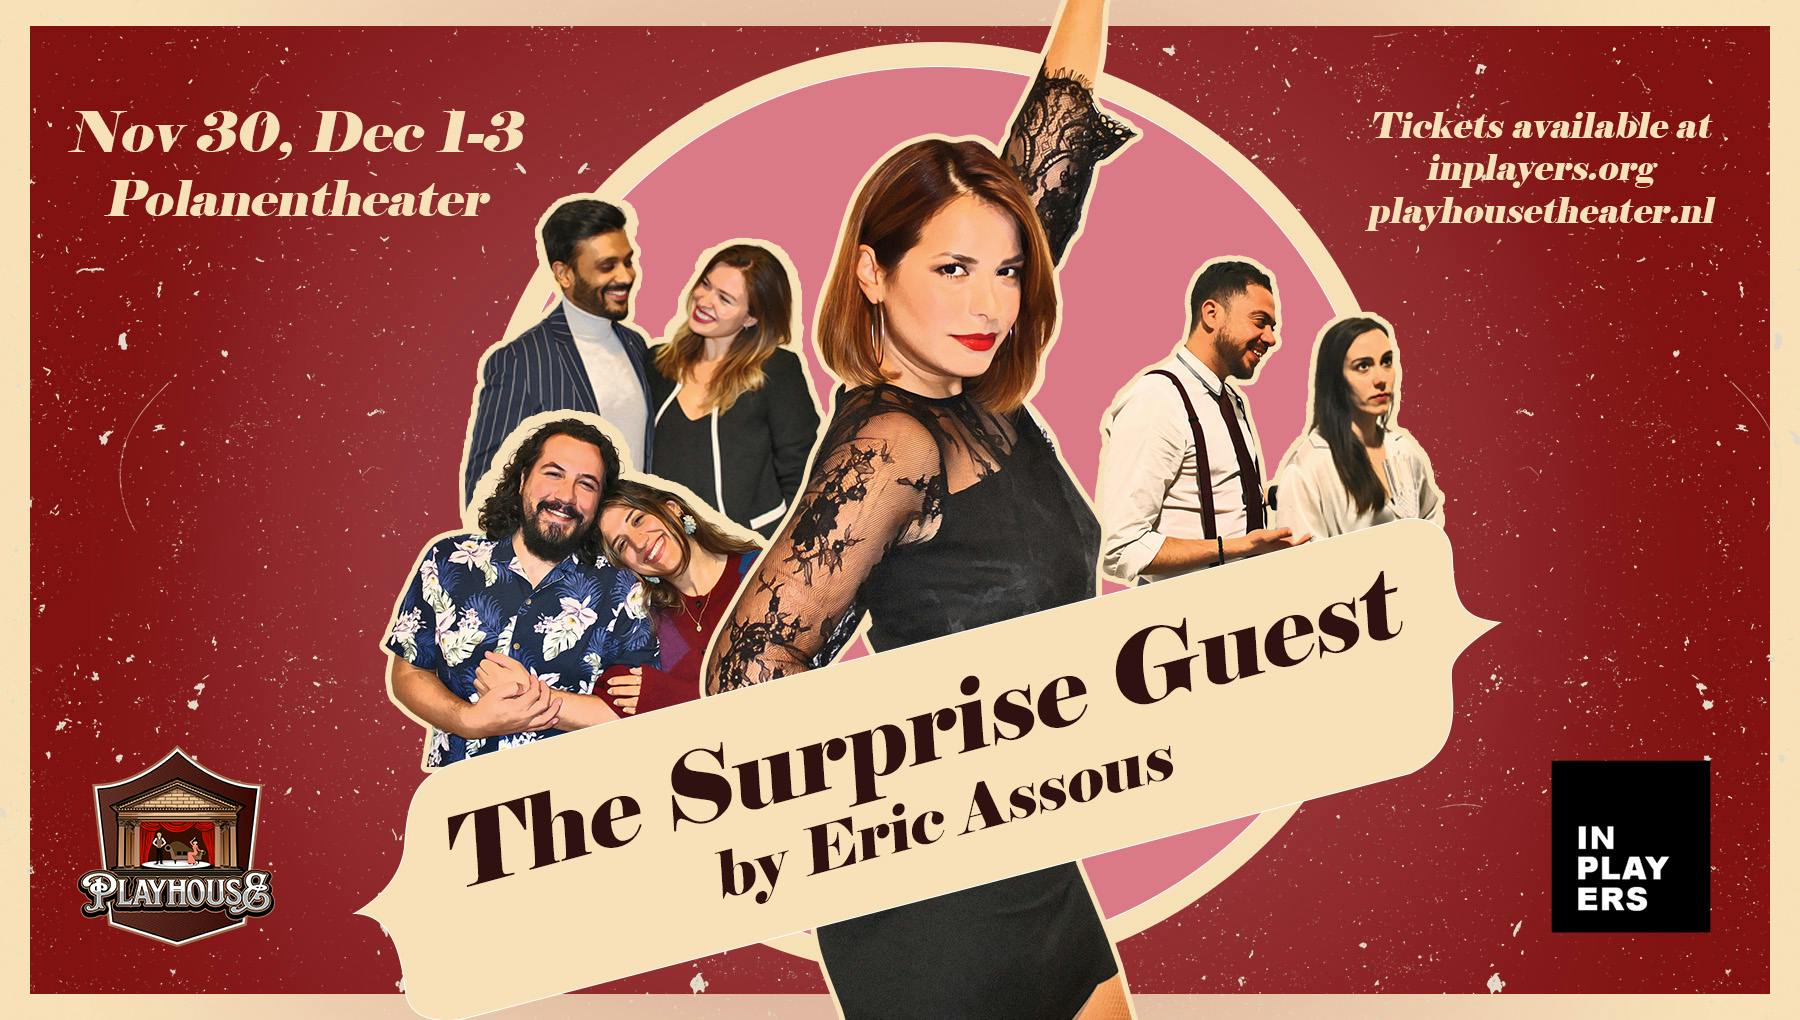 The Surprise Guest poster